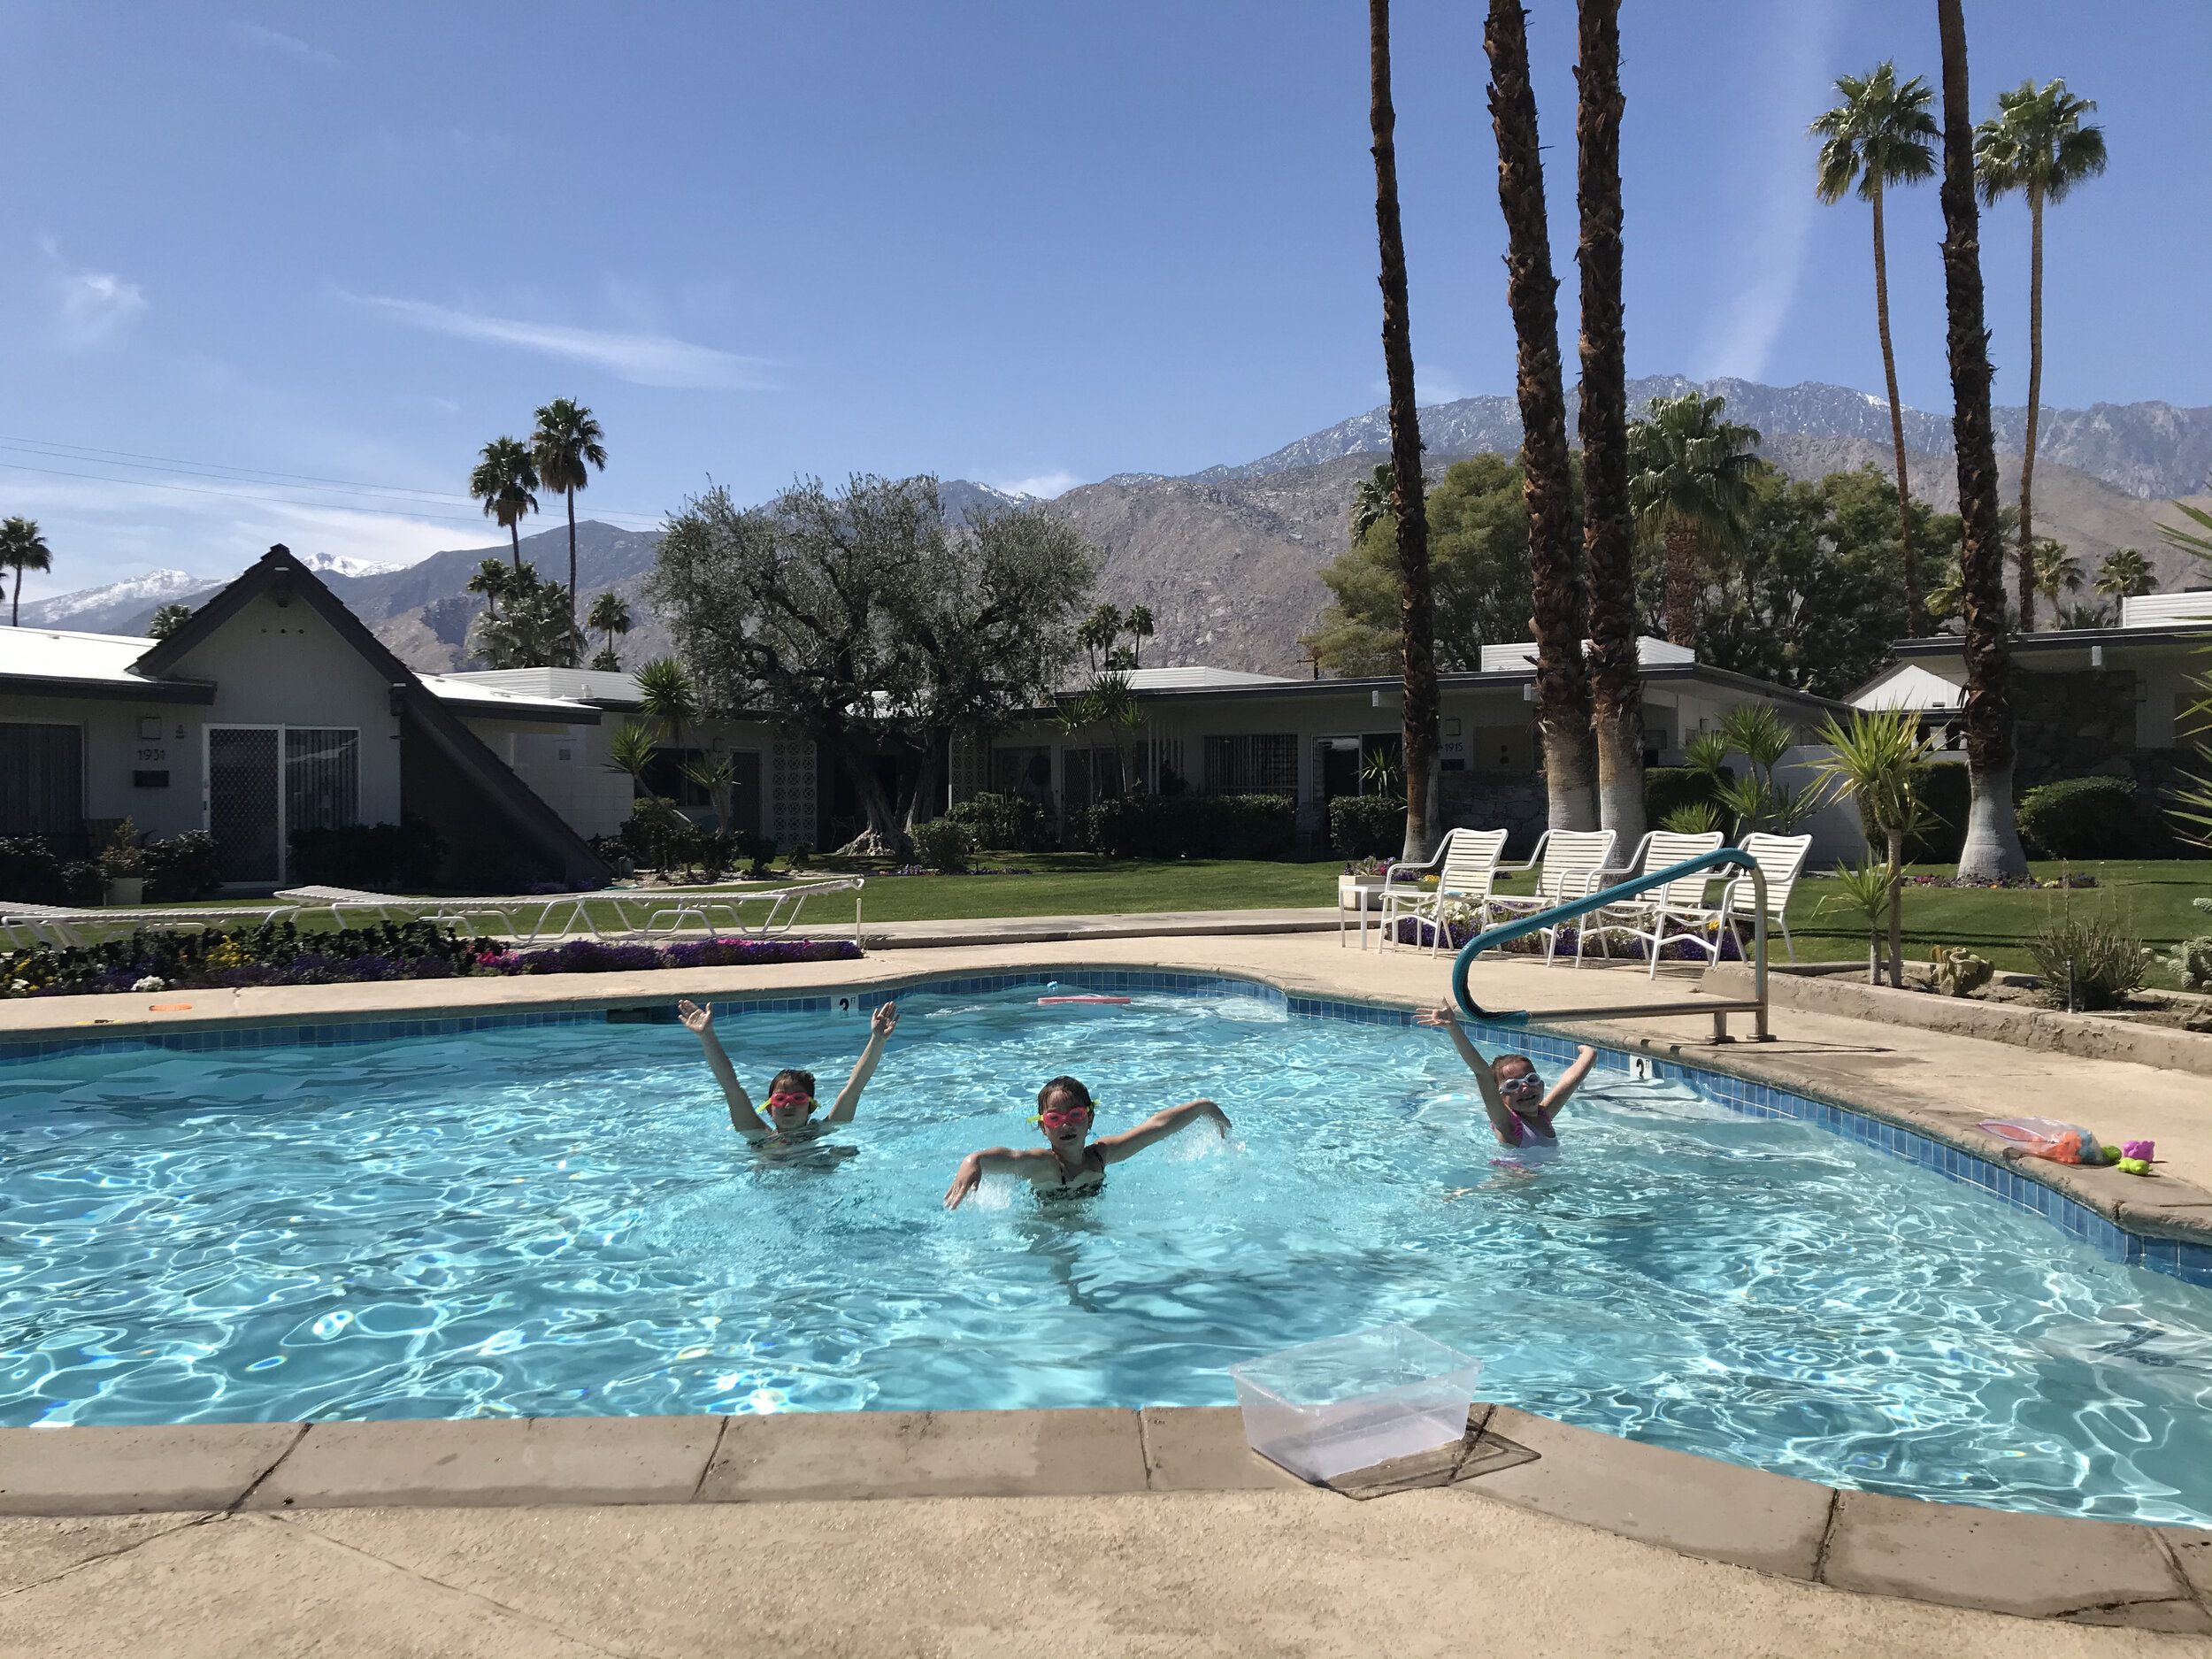 Palm springs pooltime.jpeg